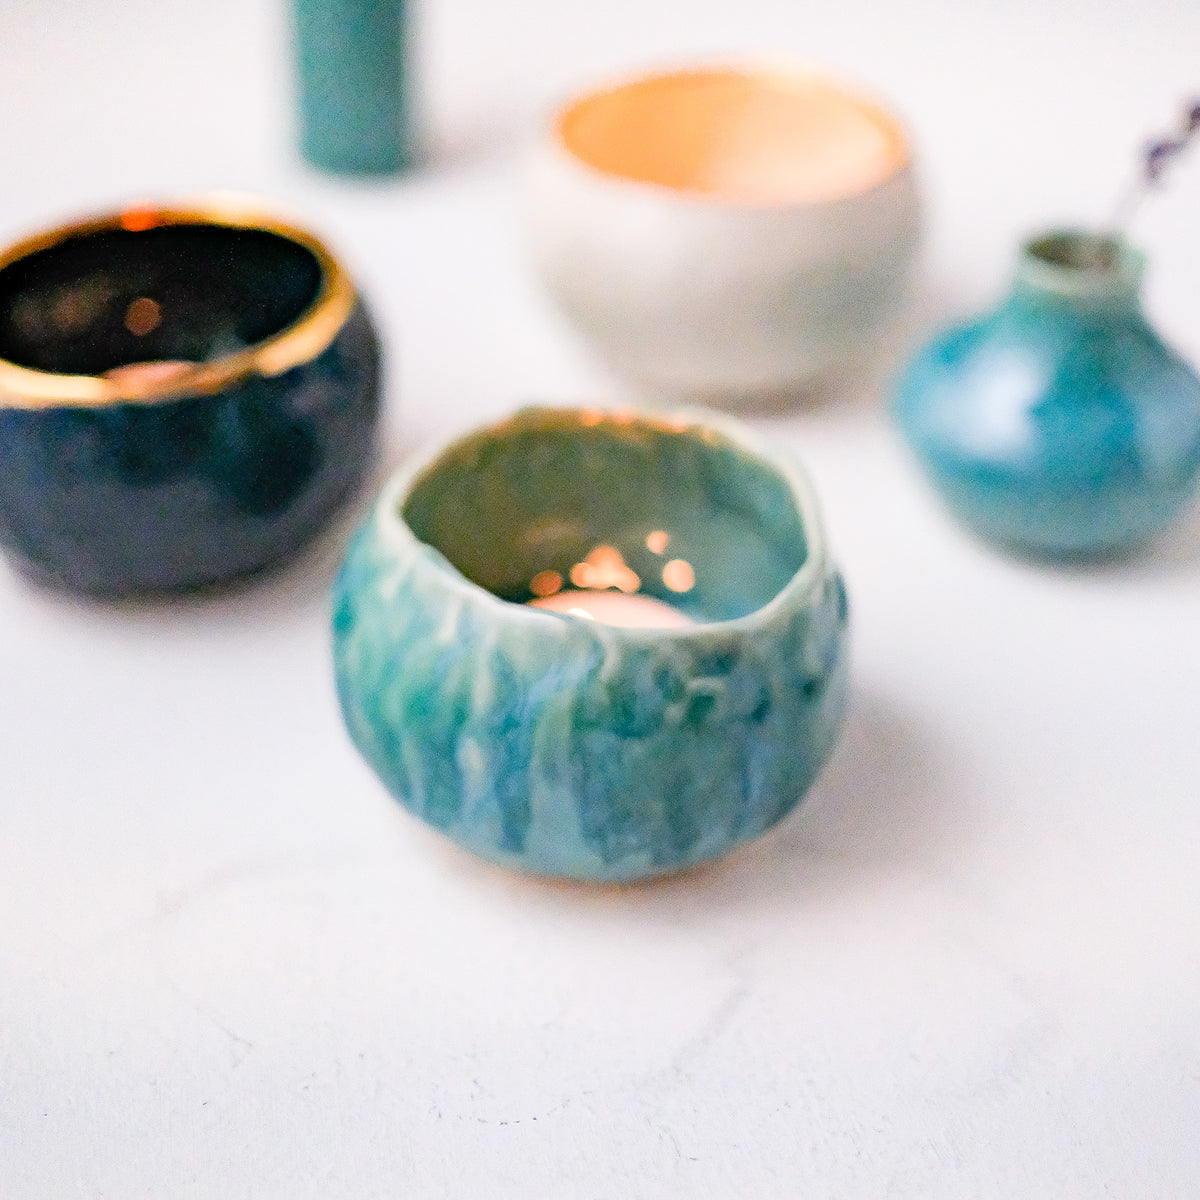 Aura Pottery workshop for making Pinch Pots by hand in the studio - Aura  Pottery